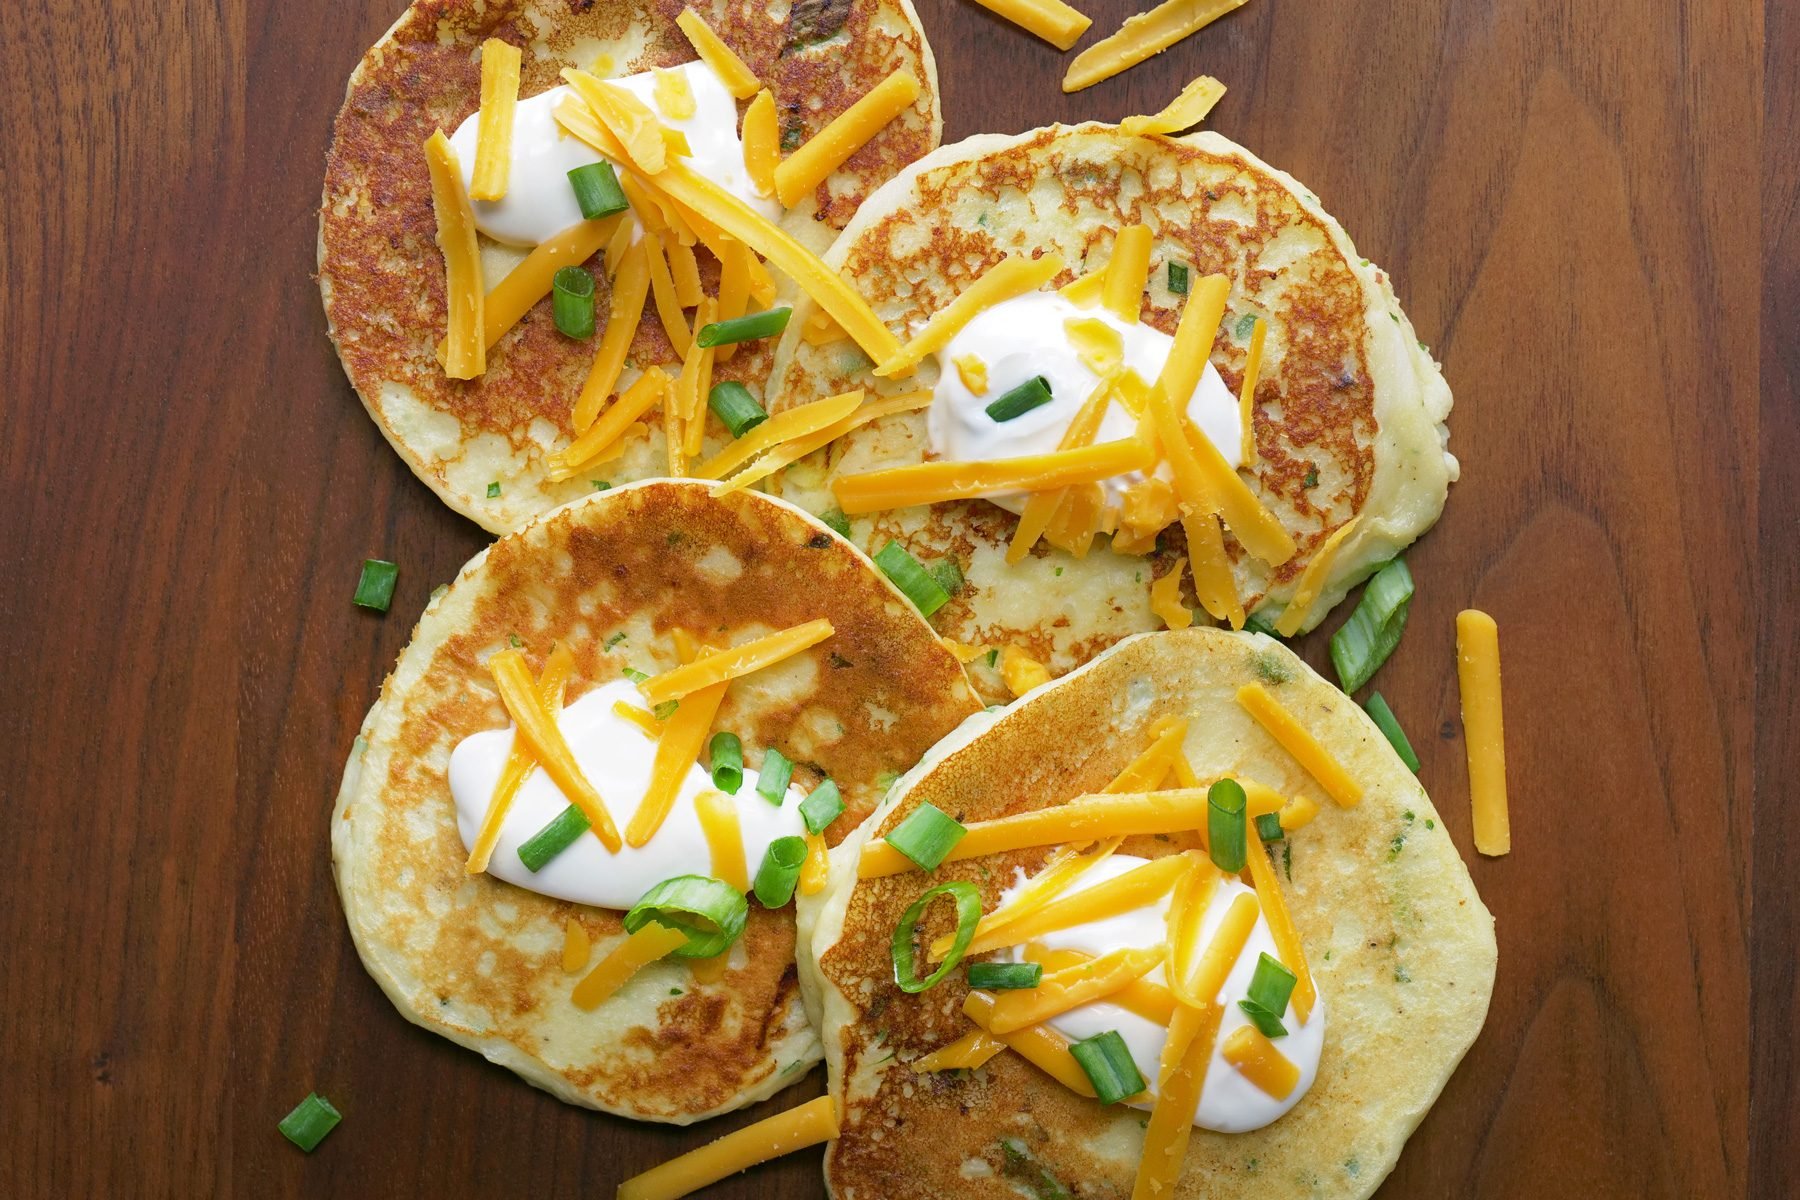 Top view of mashed potato pancakes with different toppings